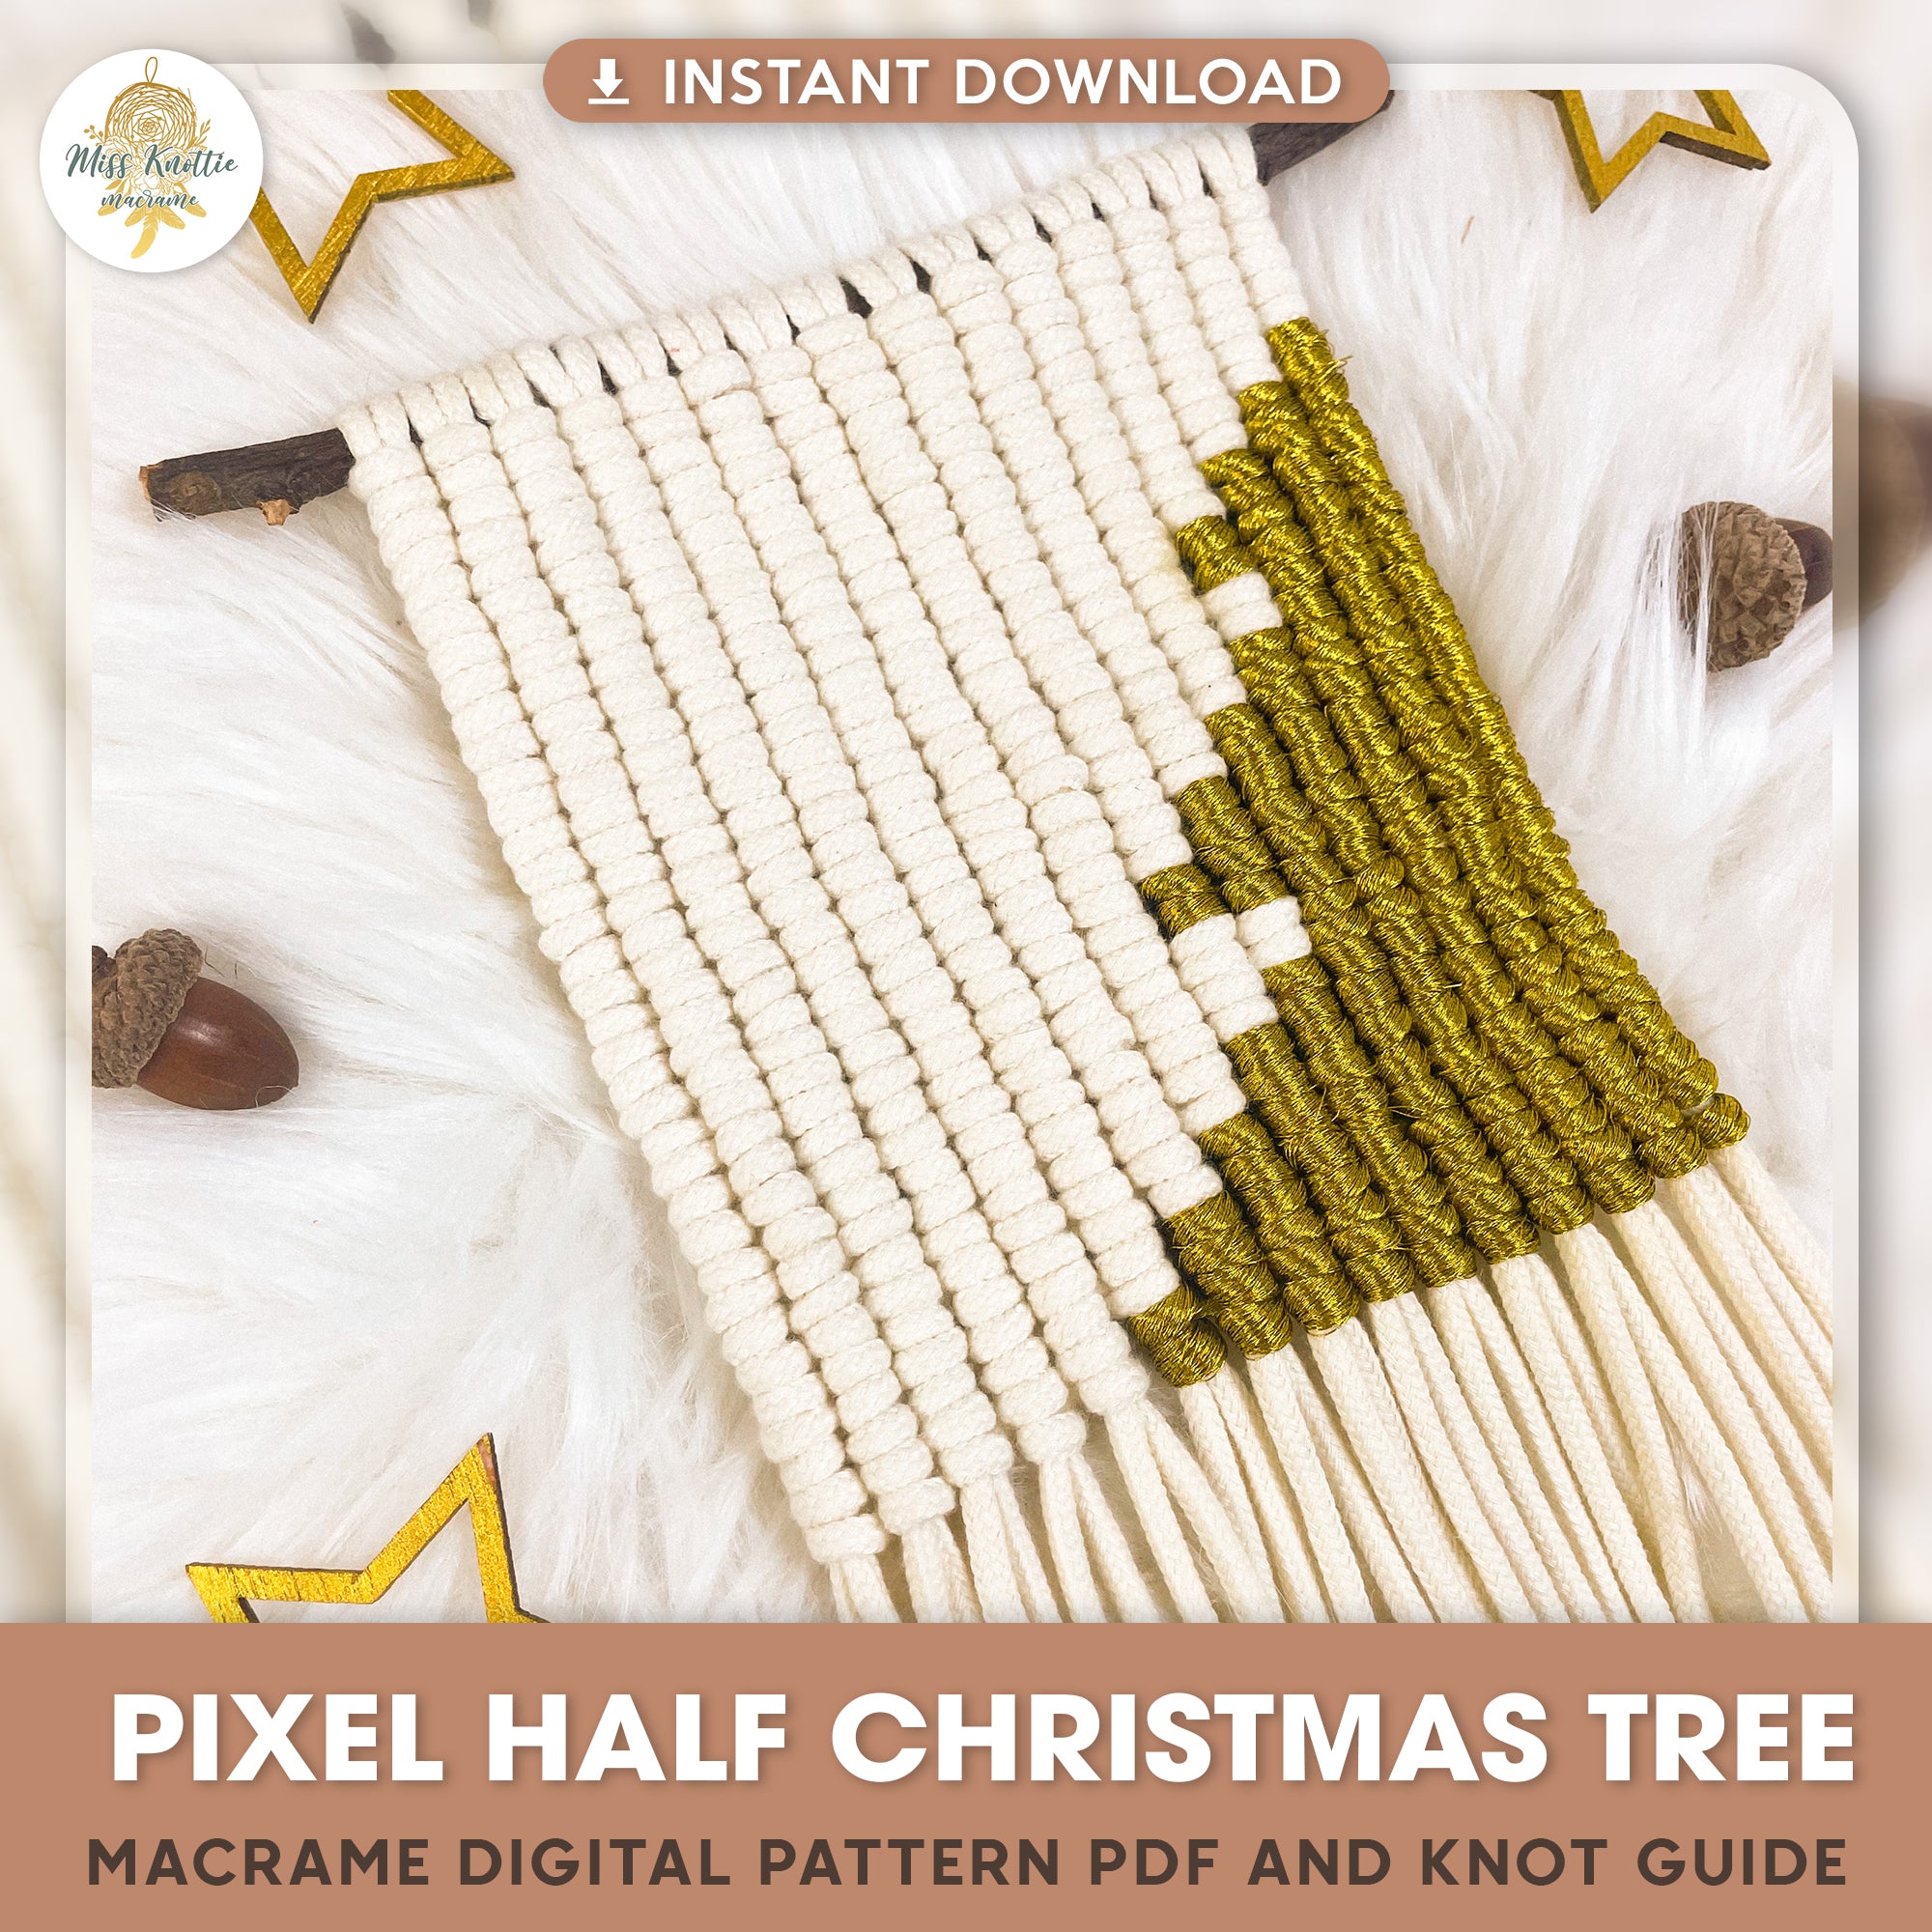 Half Christmas Tree Pixel Pattern - Digital PDF and Knot Guide